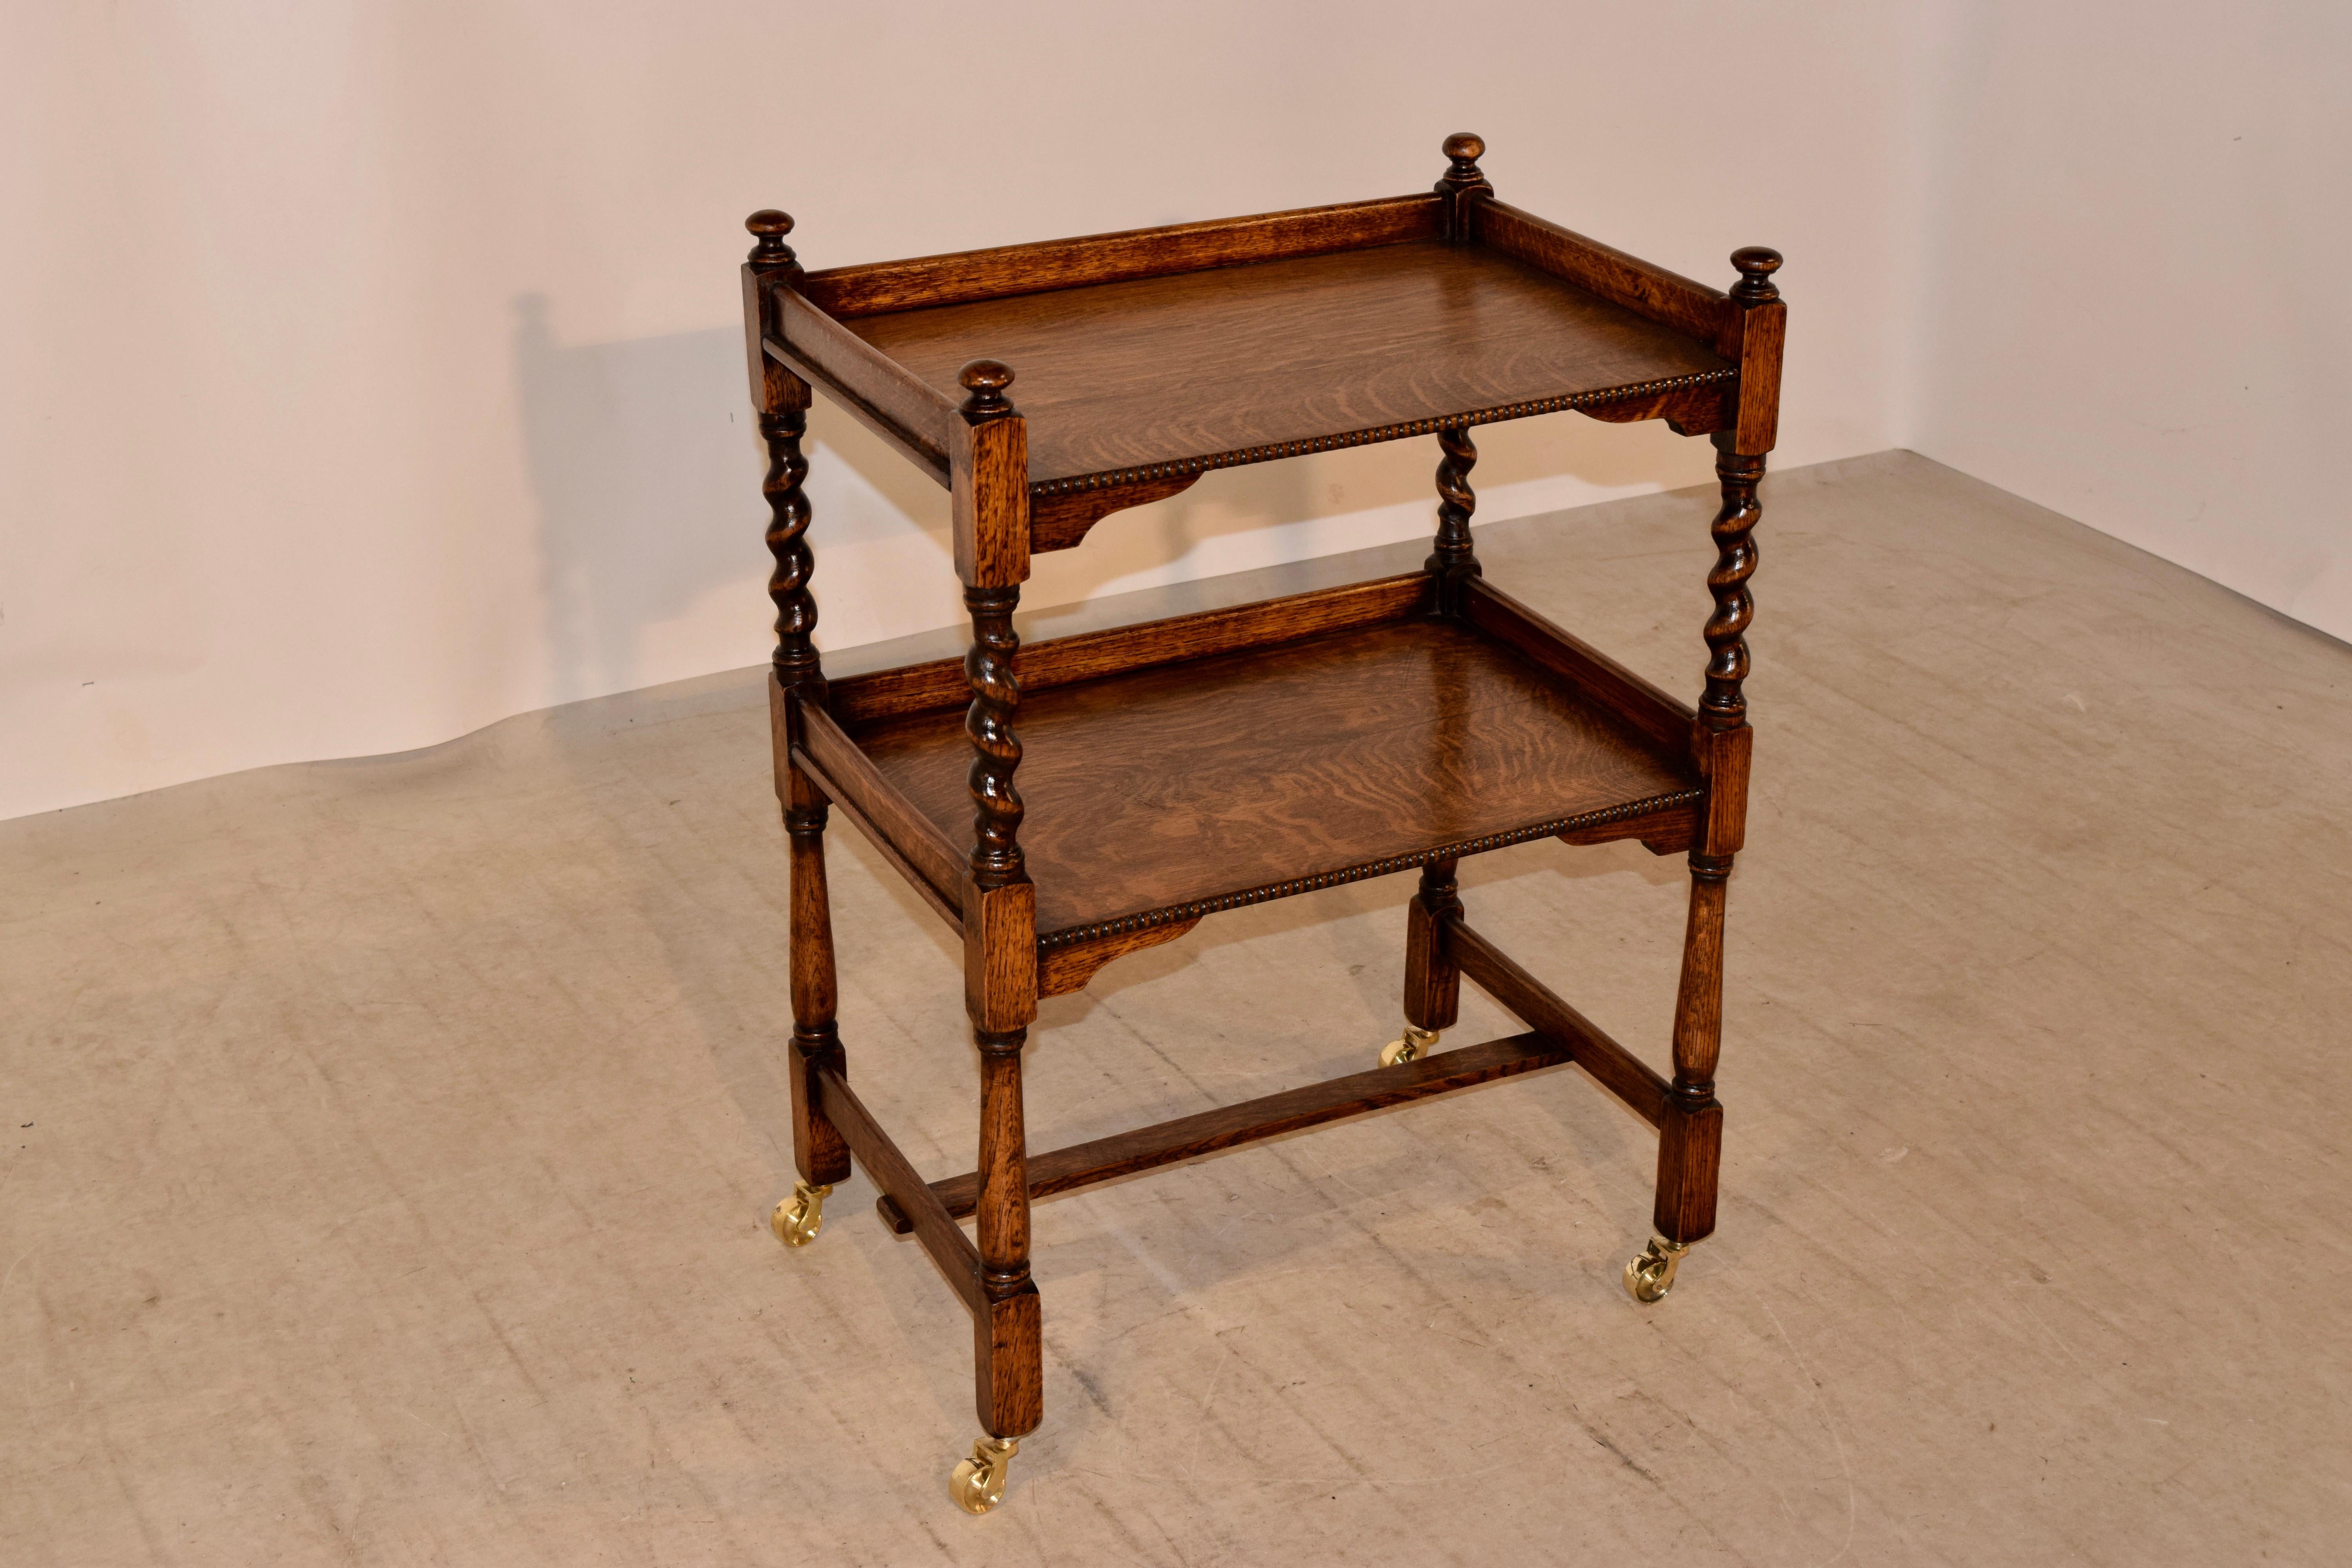 Edwardian drinks cart from England made from oak with two shelves which have beaded edges across the front, separated by hand-turned barley twist shelf supports following down to hand-turned legs joined by simple stretchers. Casters are hand cast